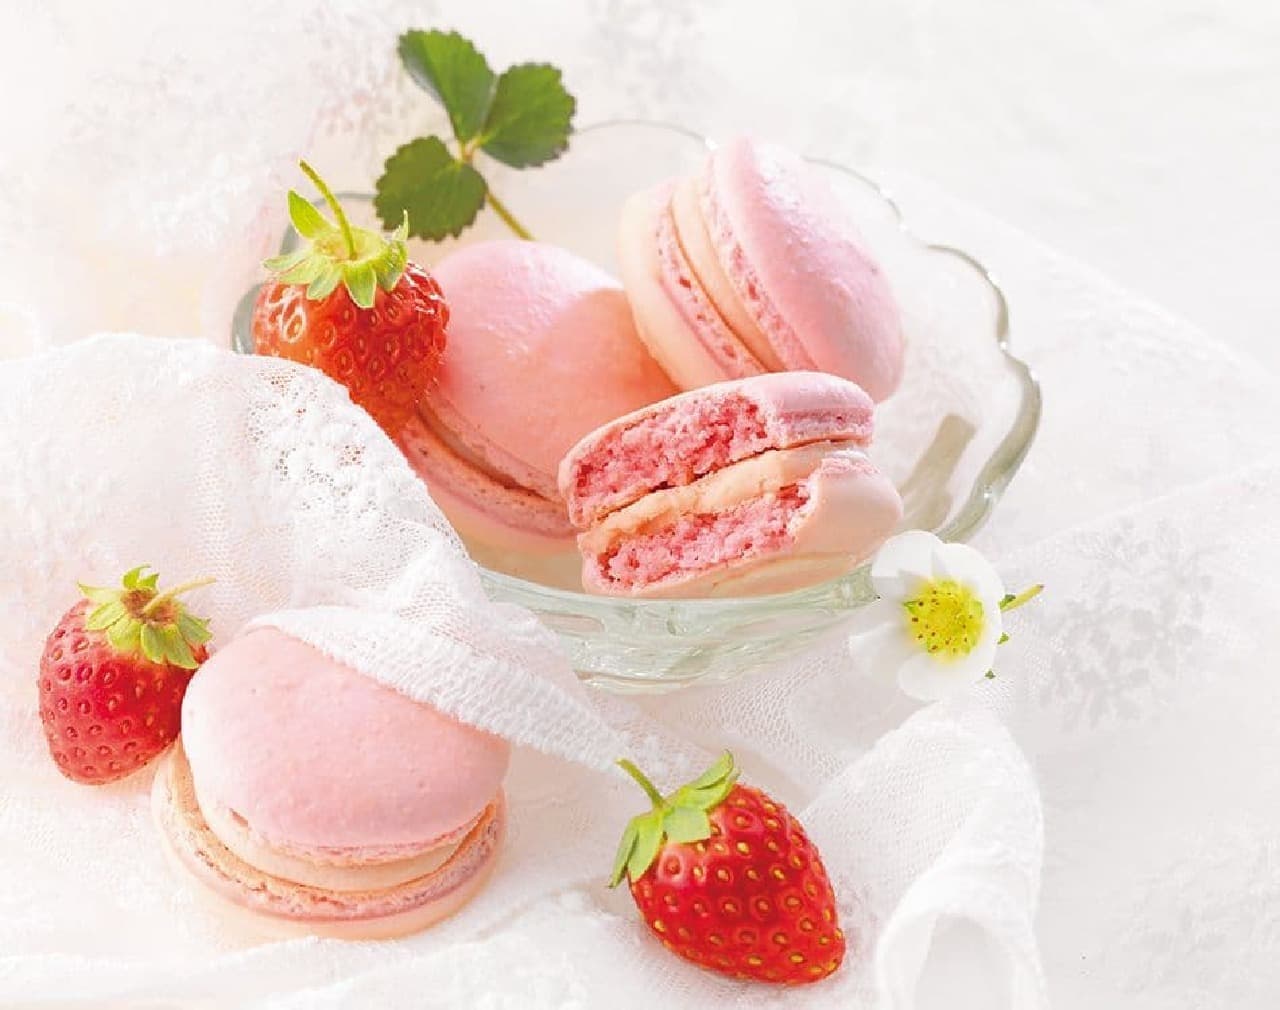 Royce's "Strawberry & Fromage Macaroon